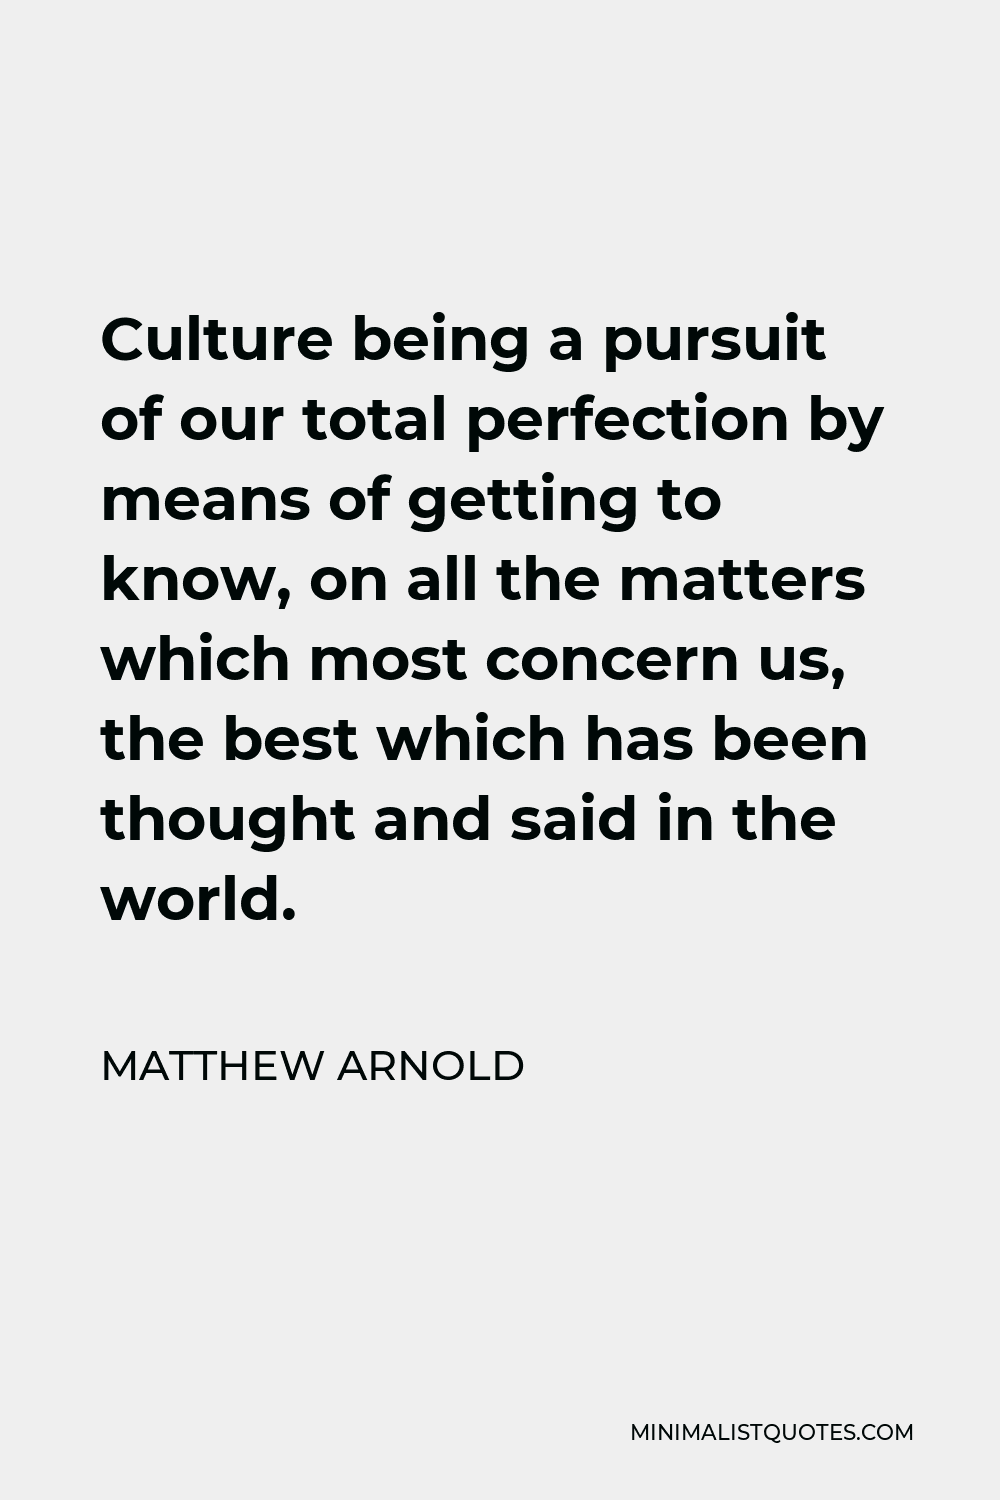 Matthew Arnold Quote - Culture being a pursuit of our total perfection by means of getting to know, on all the matters which most concern us, the best which has been thought and said in the world.